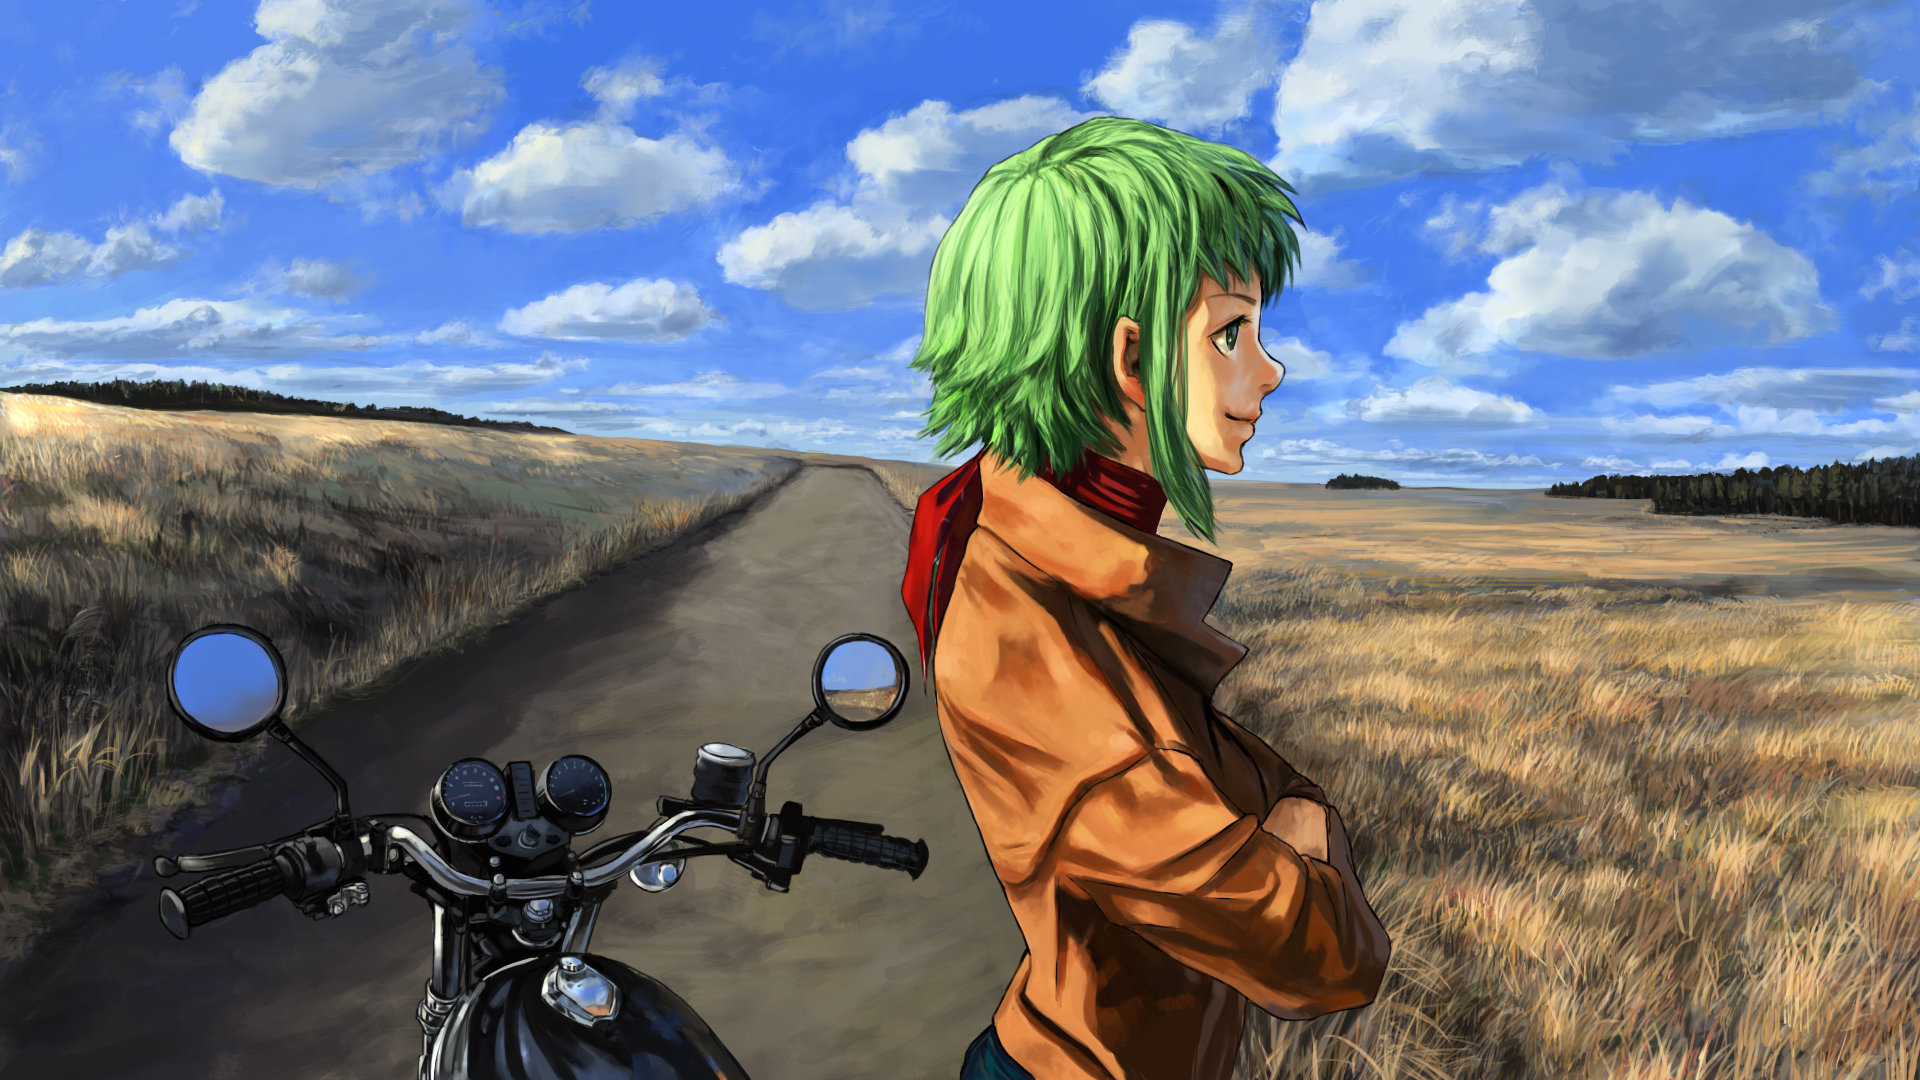 Download full hd 1920x1080 GUMI (Vocaloid) desktop background ID:1977 for free